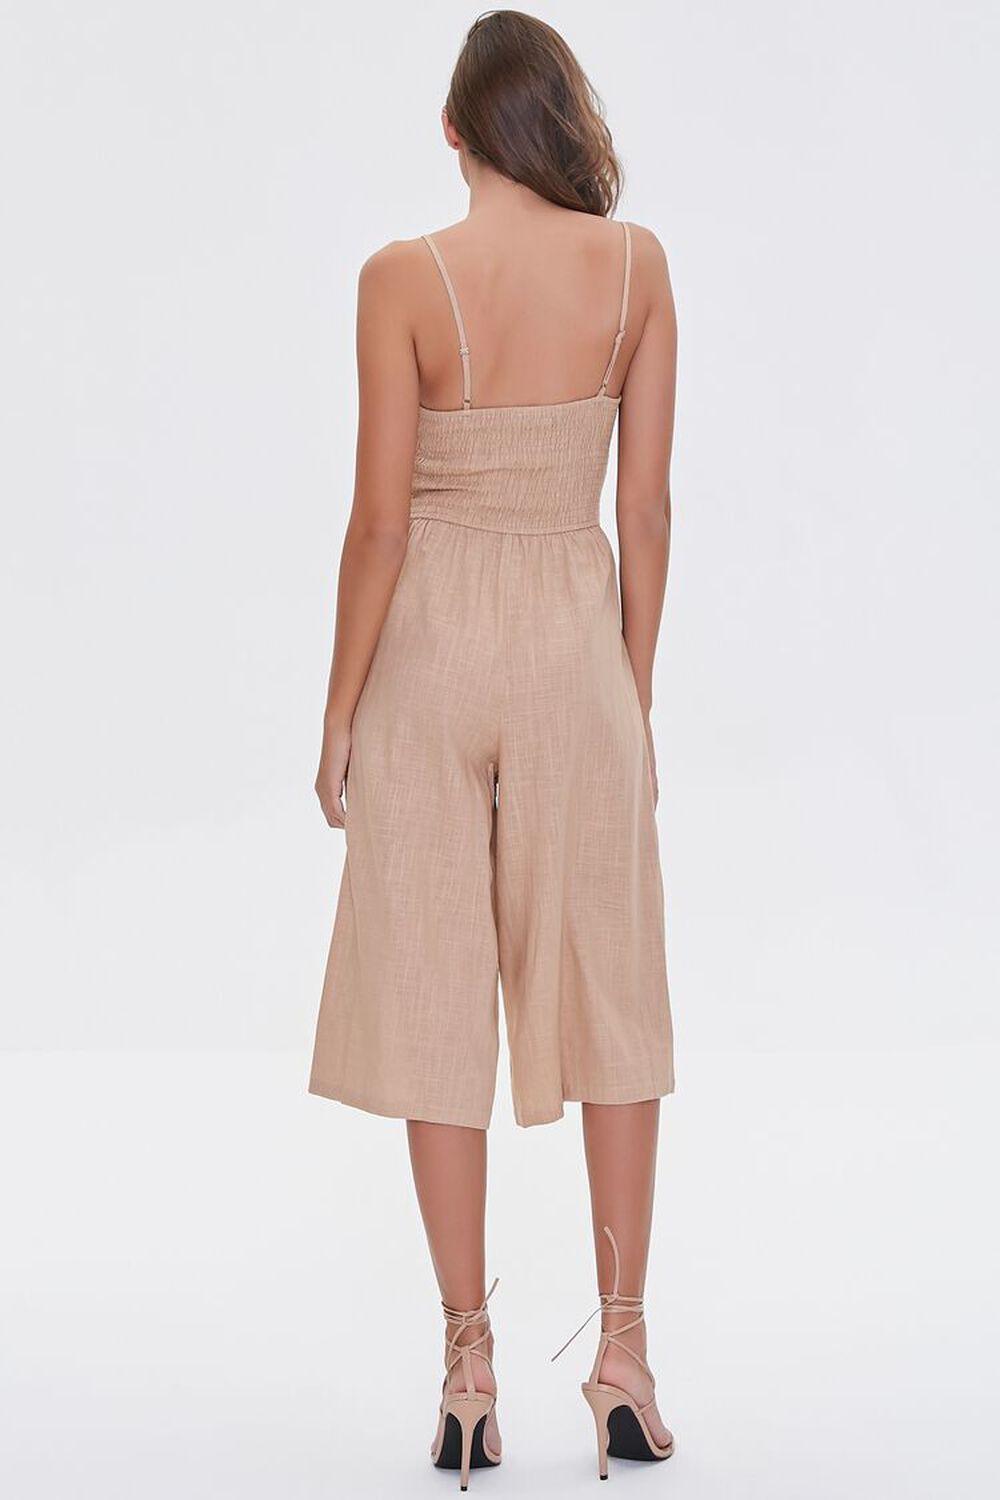 NATURAL Knotted Cutout Culotte Jumpsuit, image 3